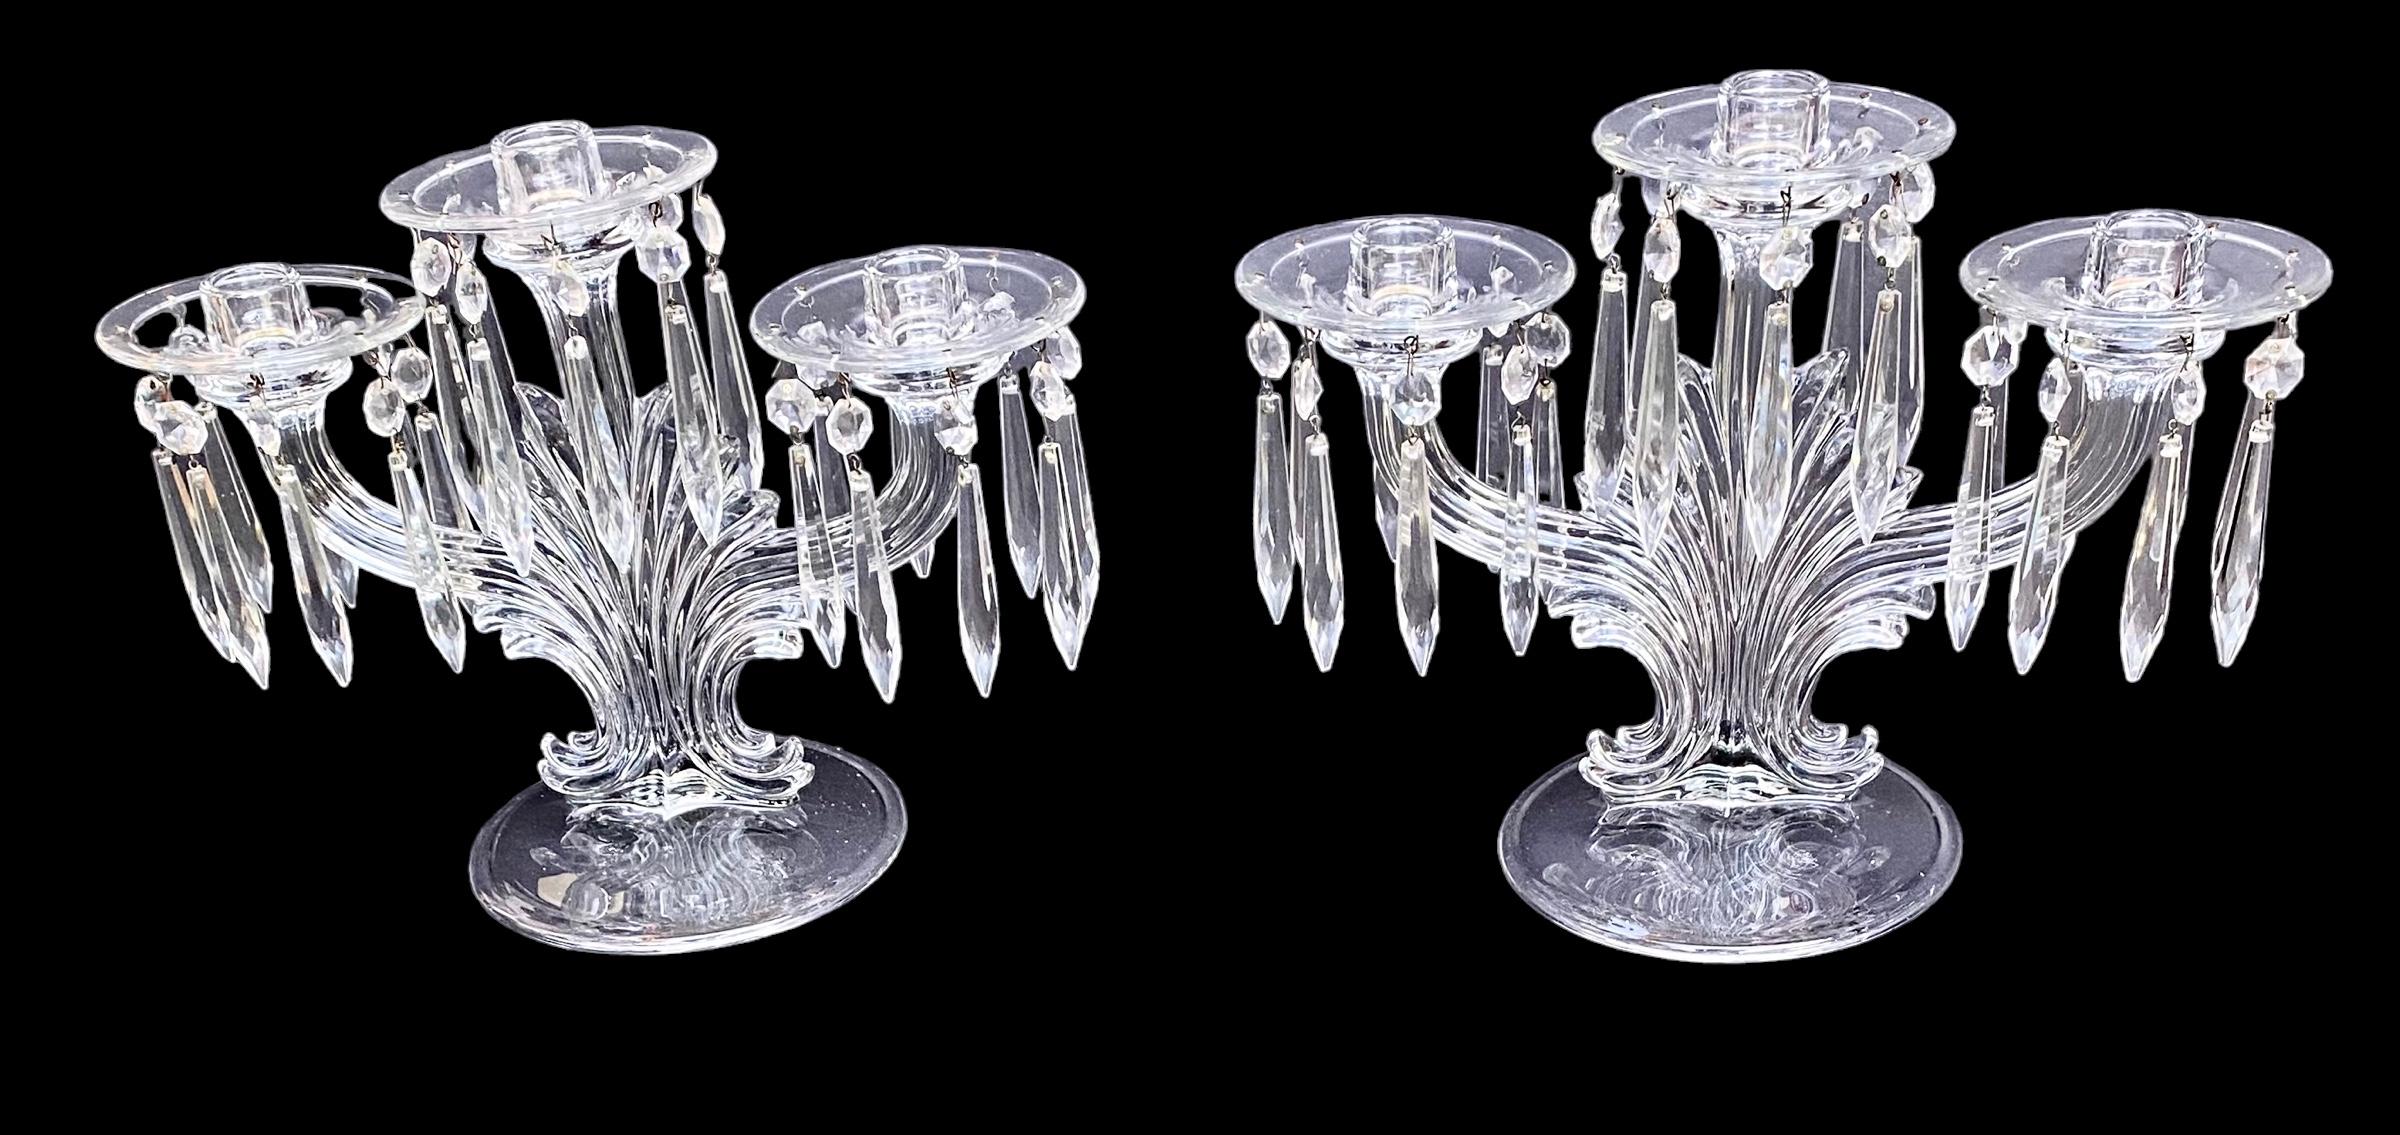 Pair of American Pressed Glass Three Light Candelabra, Early 20th C., on Swirled For Sale 6